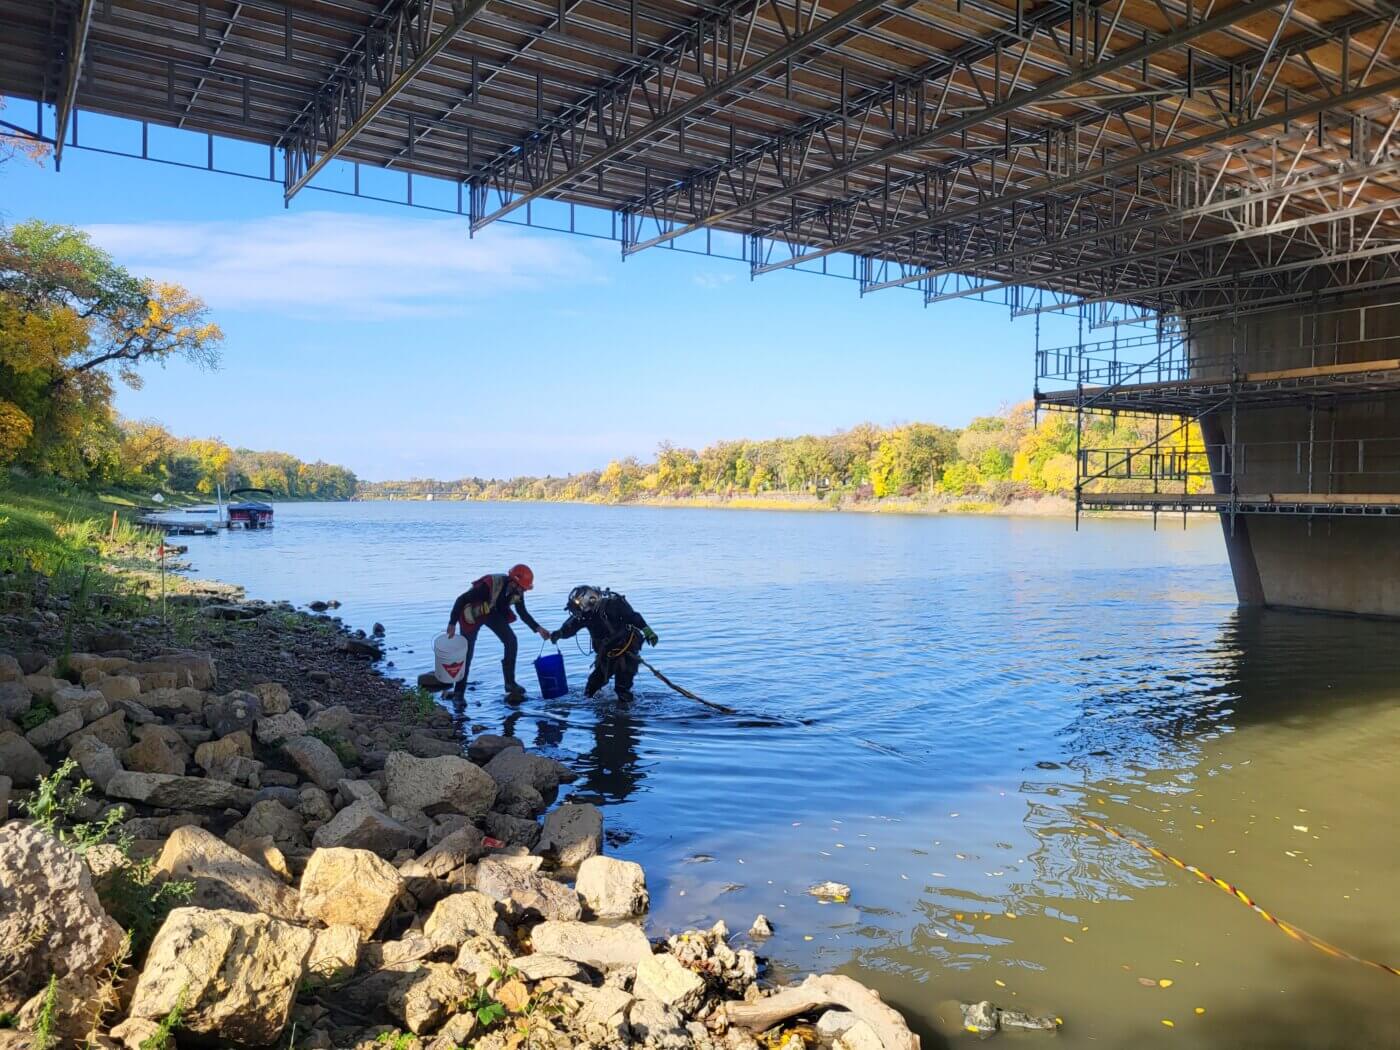 A diver passes a bucket containing mussels to a biologist on shore. The mussel salvage is being conducted below the St. Vital Bridge where riprap will be placed.